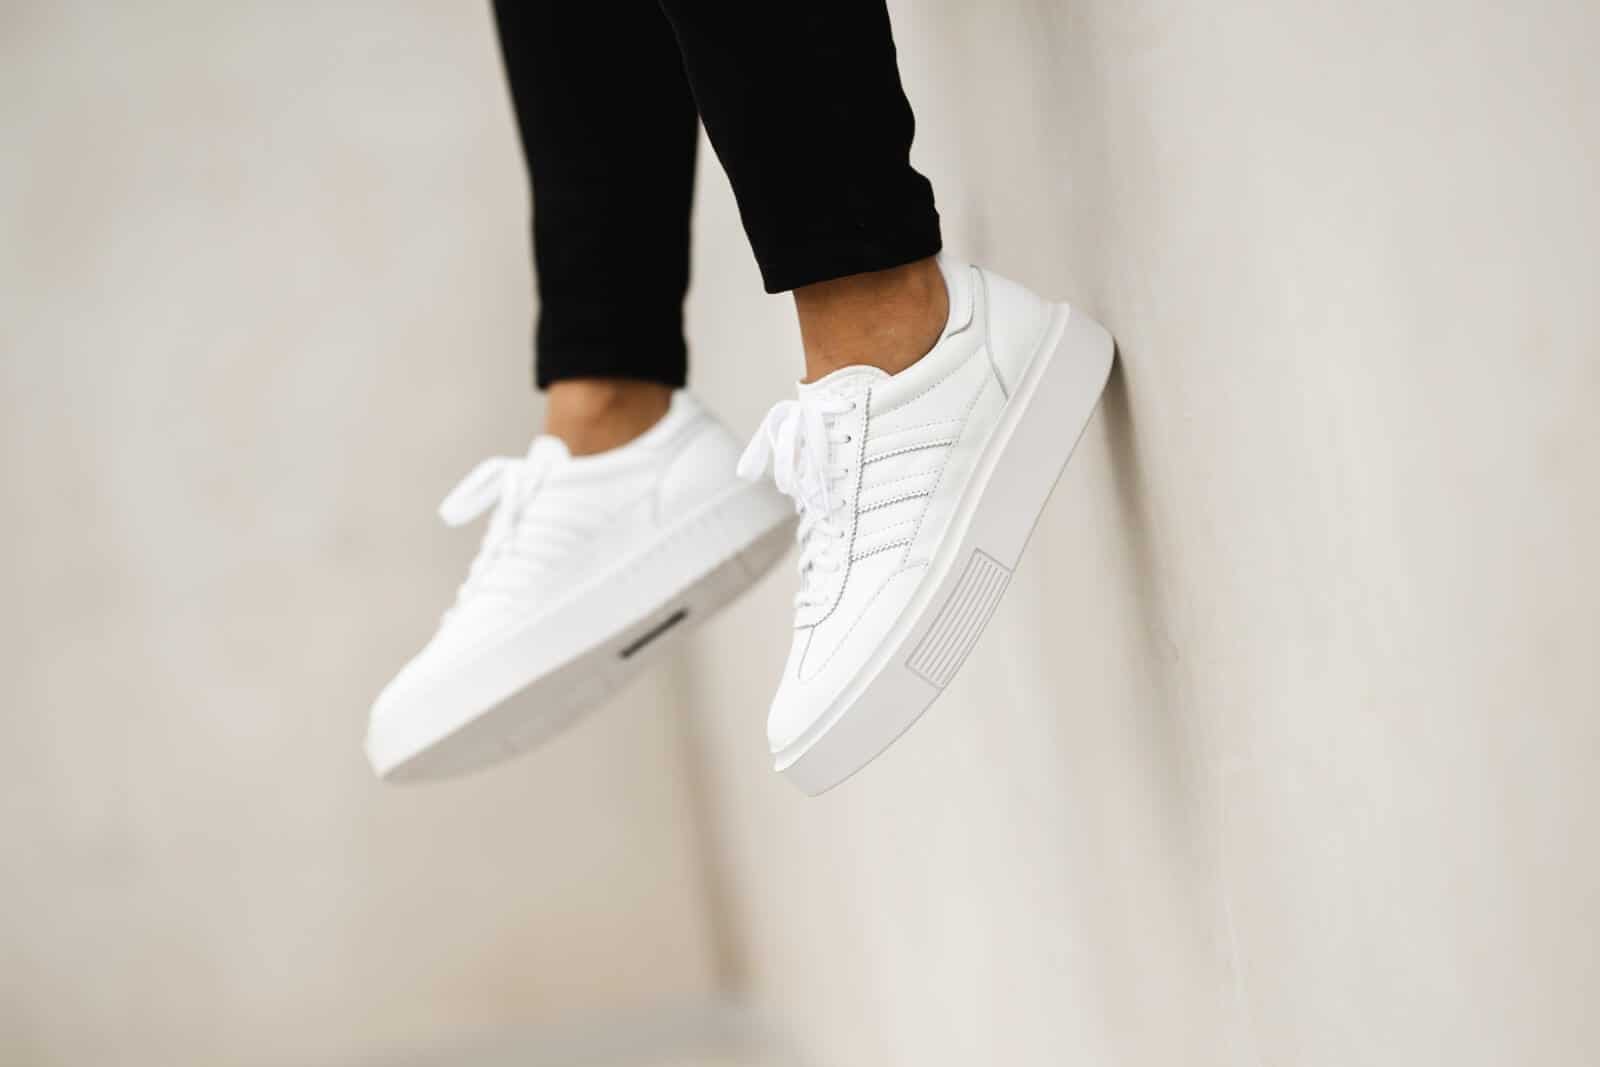 The 25 Best Fashion Sneakers For Women in 2022